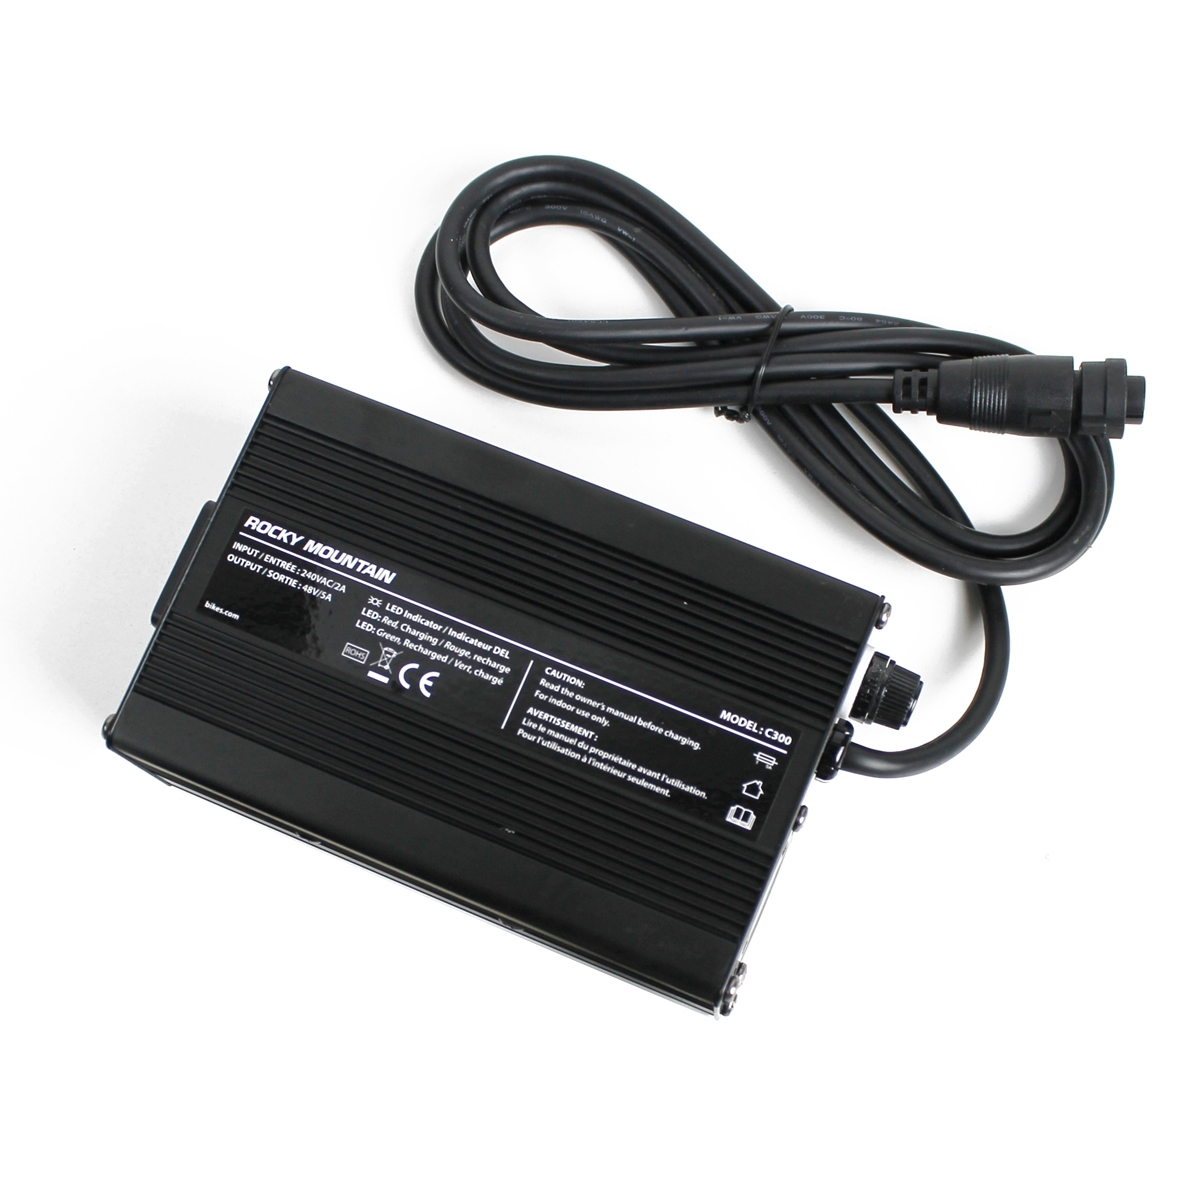 Ebike battery charger for Powerplay models from 2017 to 2021